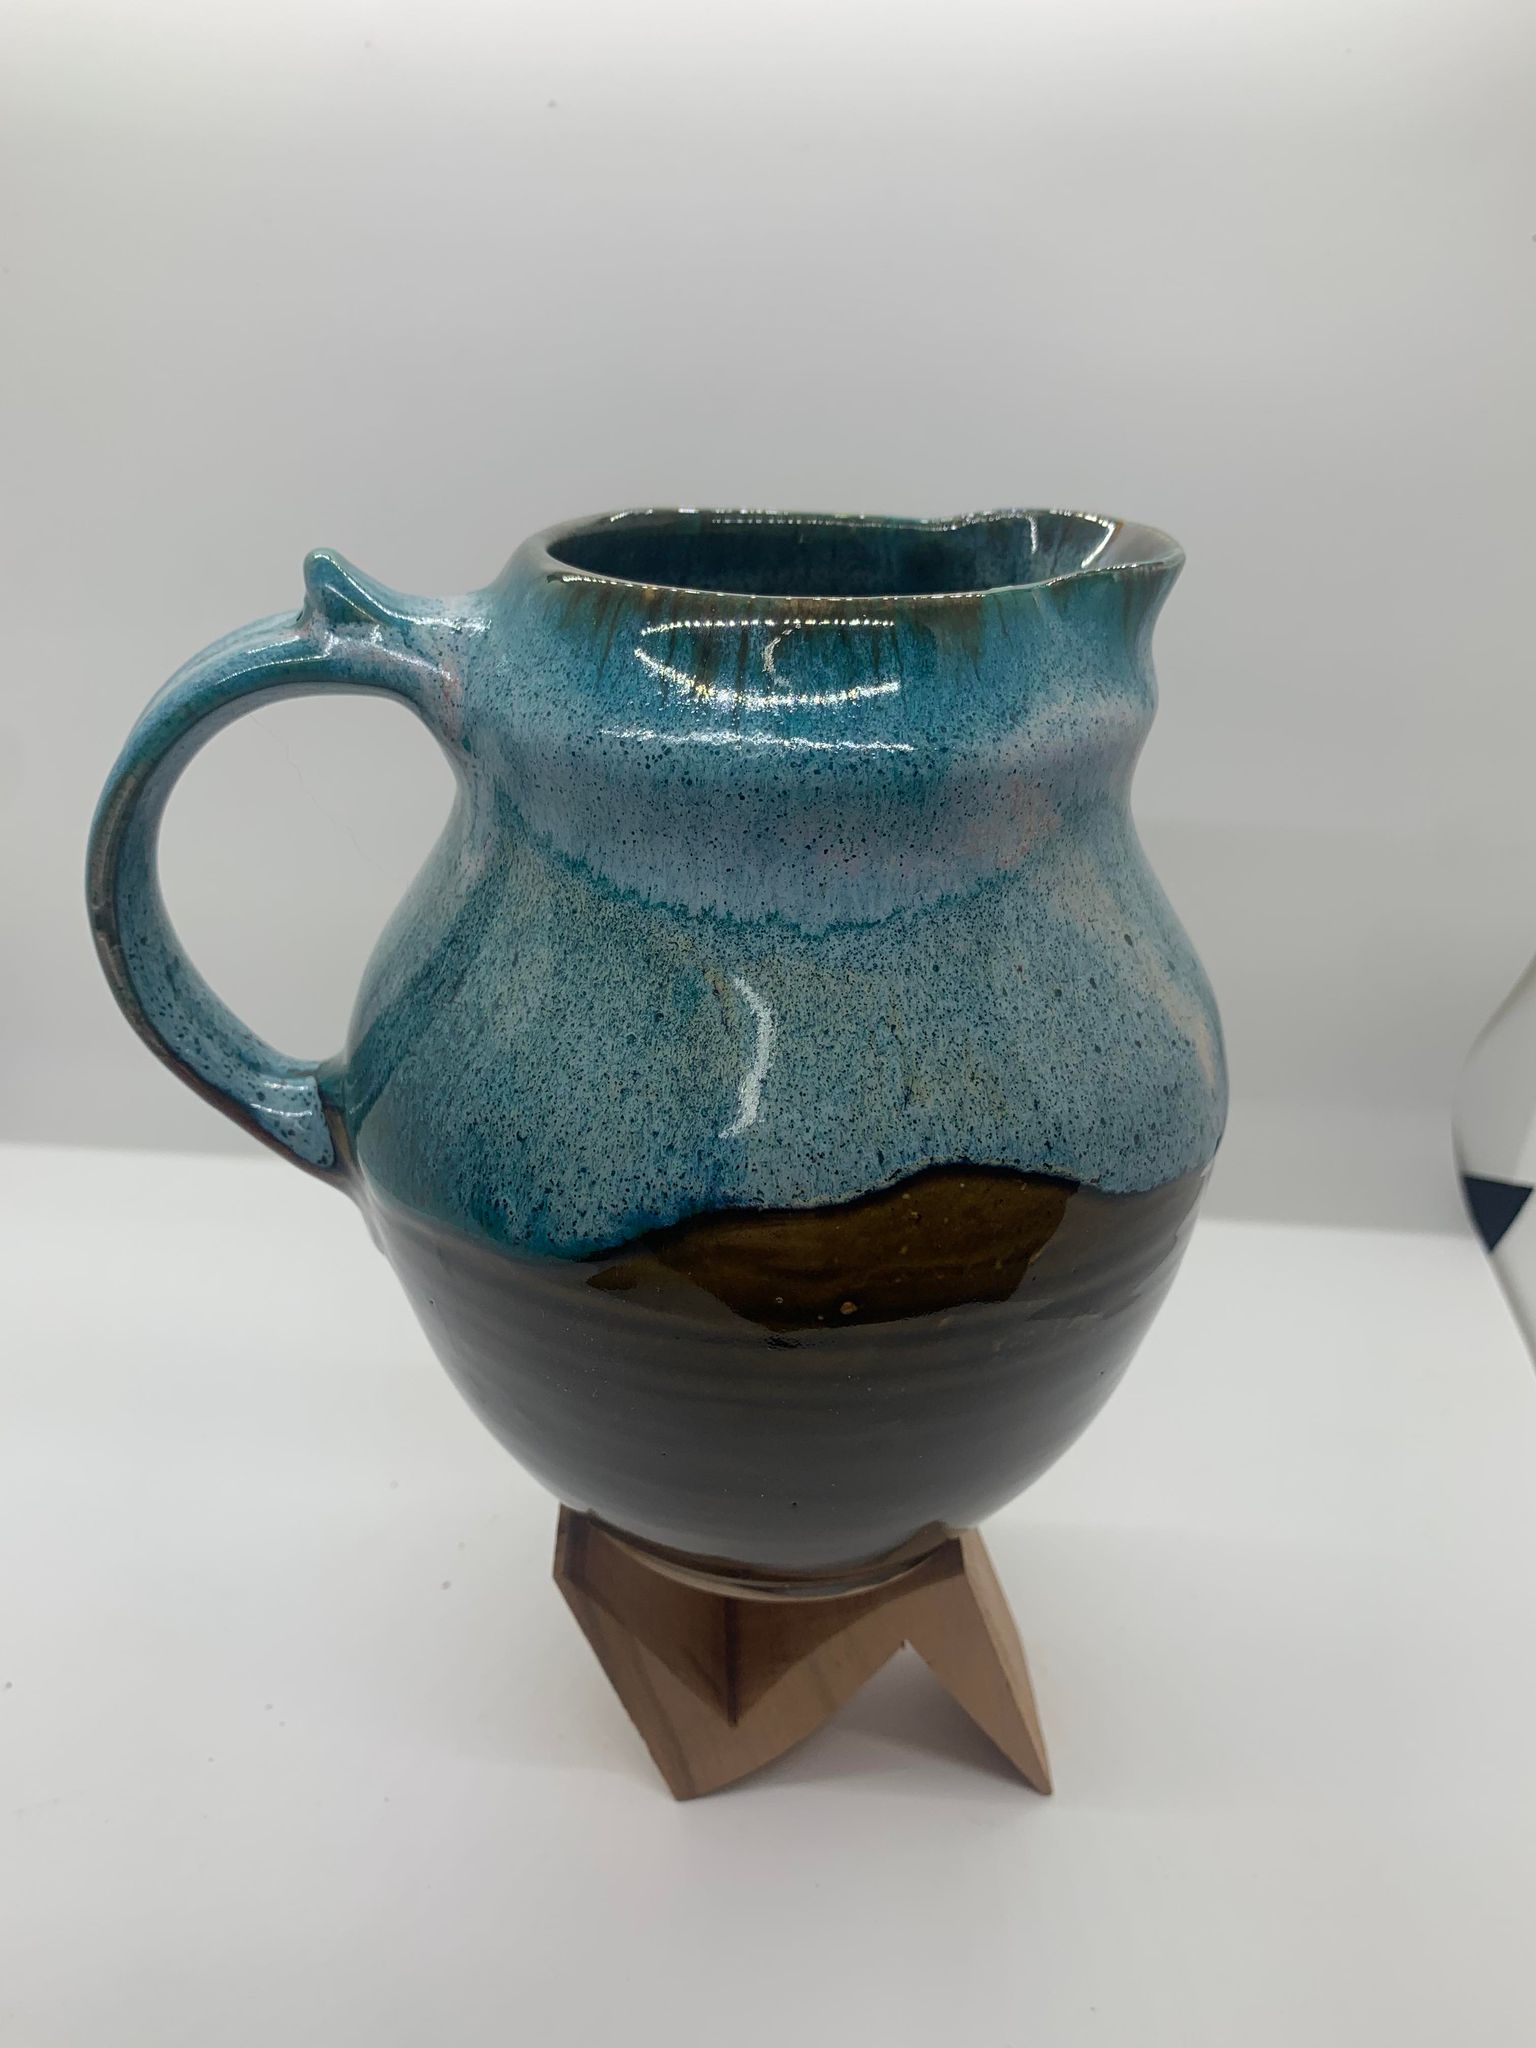 A Perry Munn Pottery Small Pitcher on a wooden stand